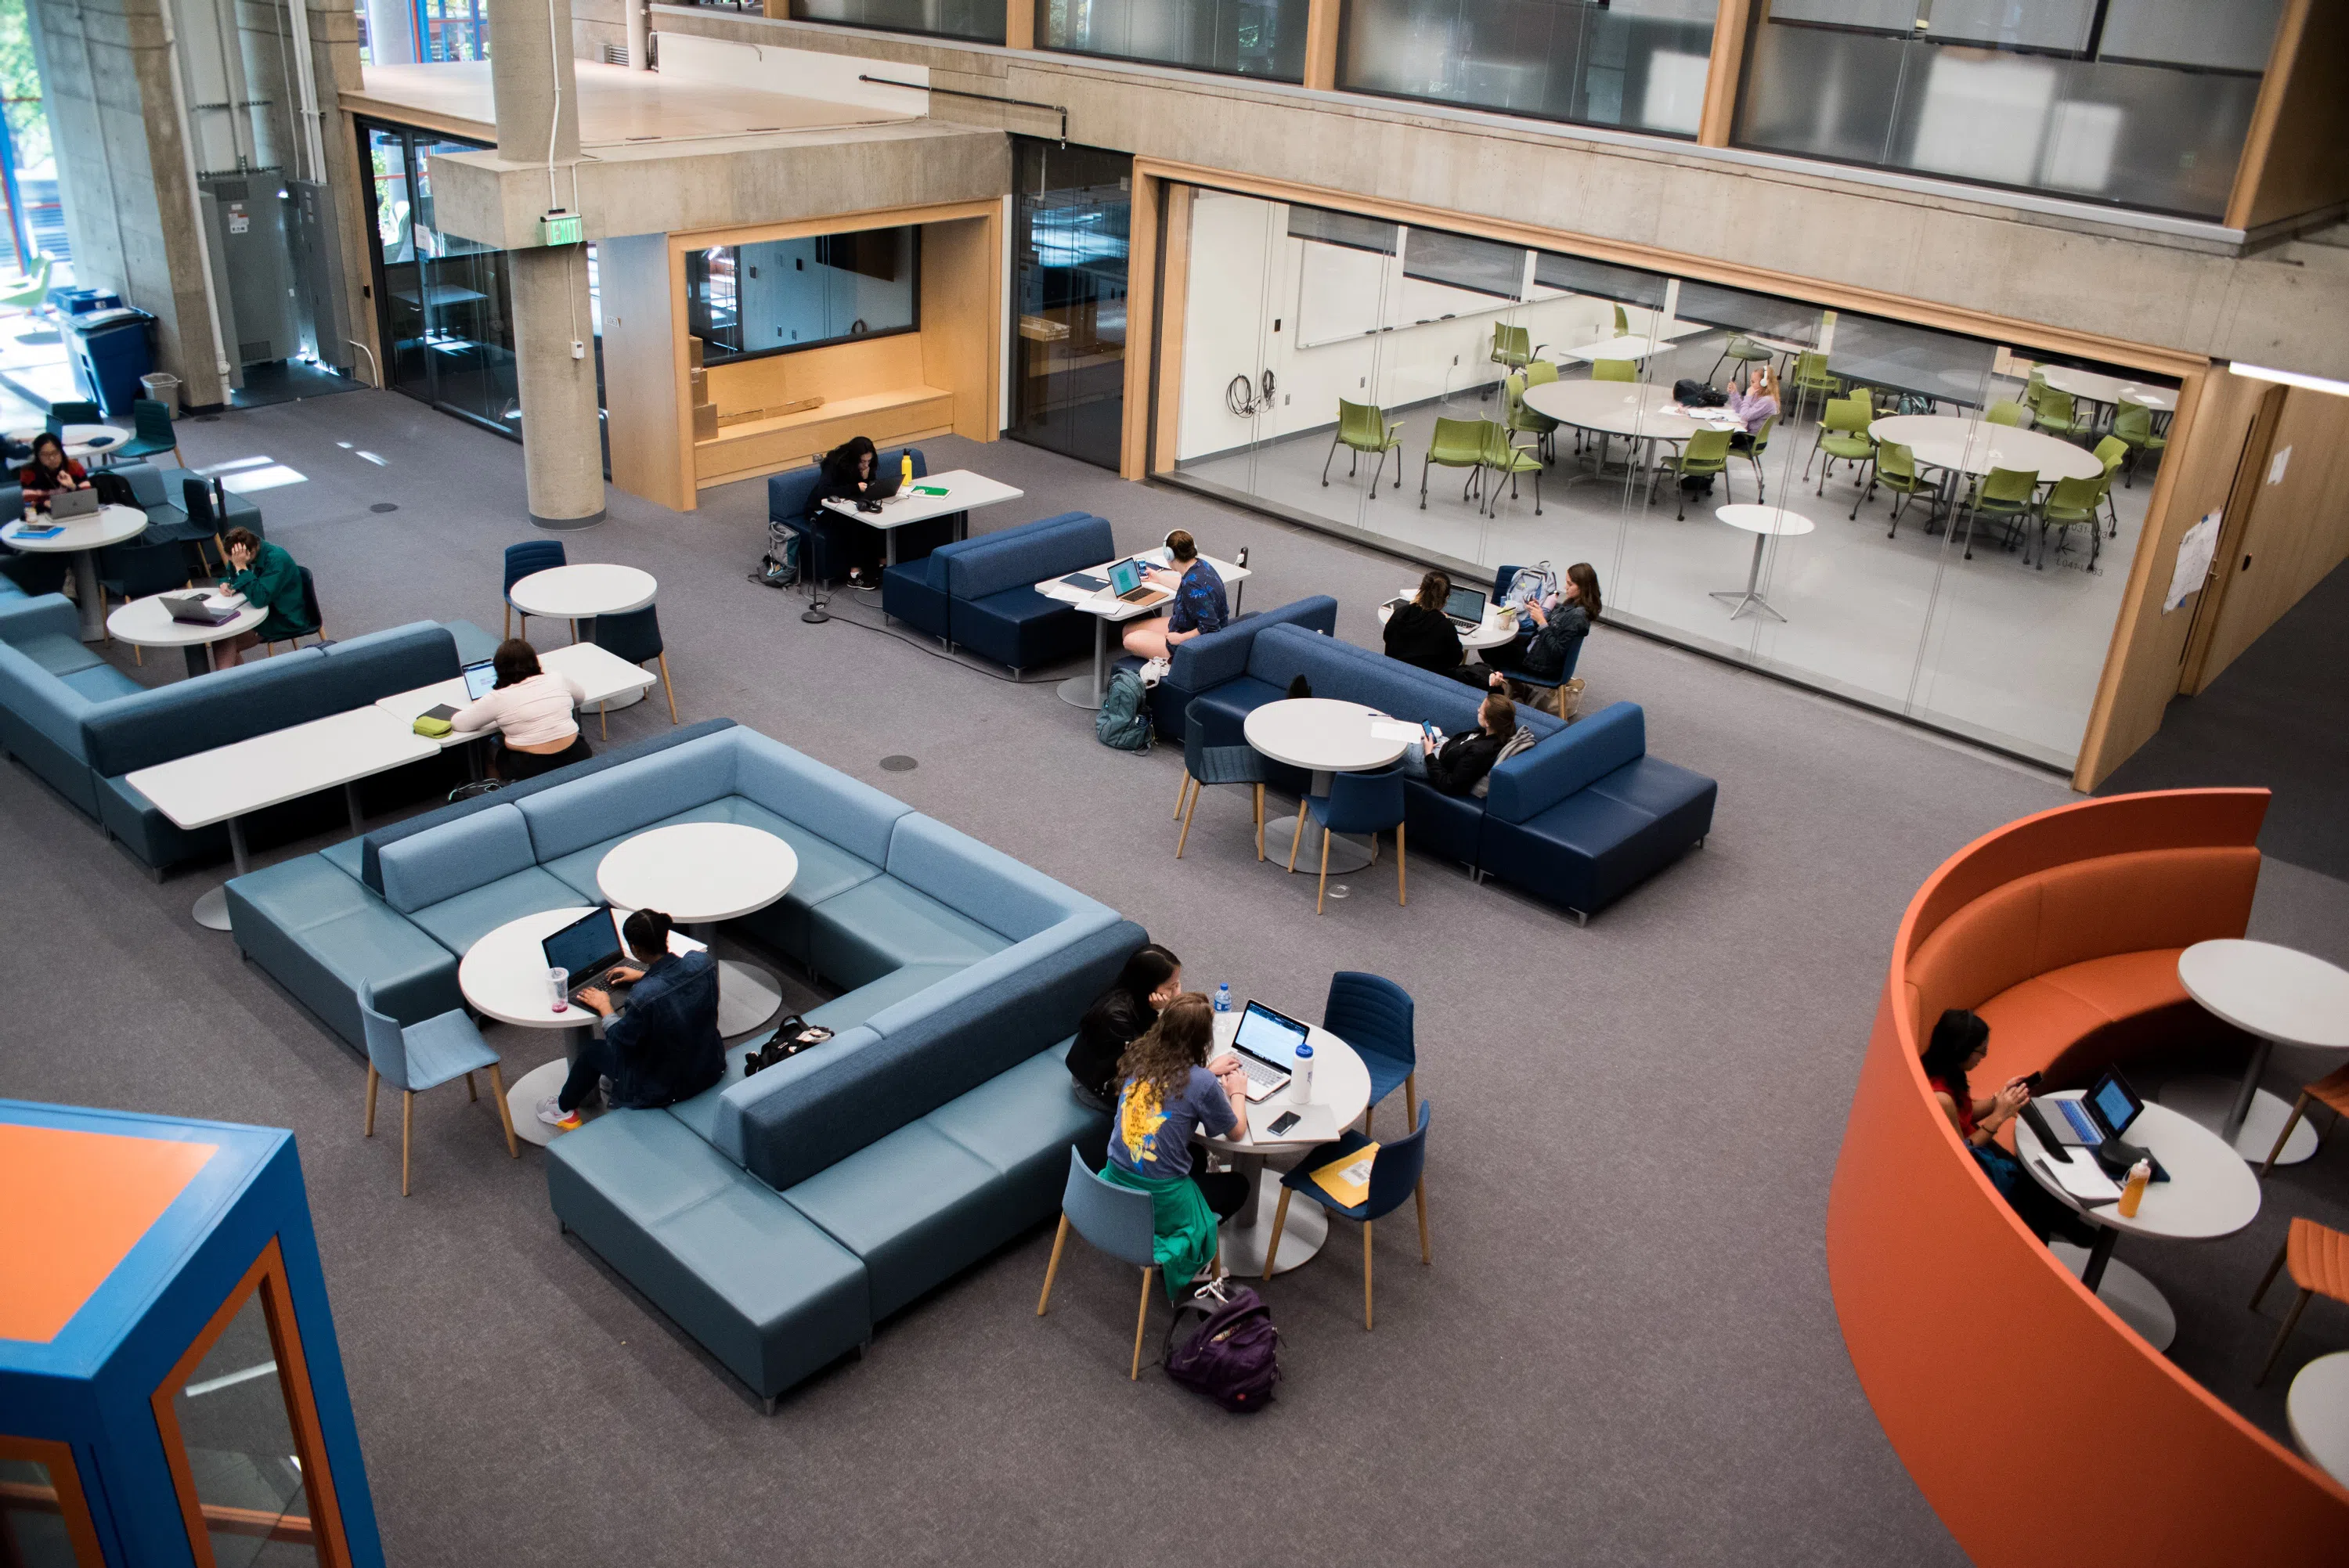 Wellesley students studying in the Data Lounge, an open study space in the Science Center